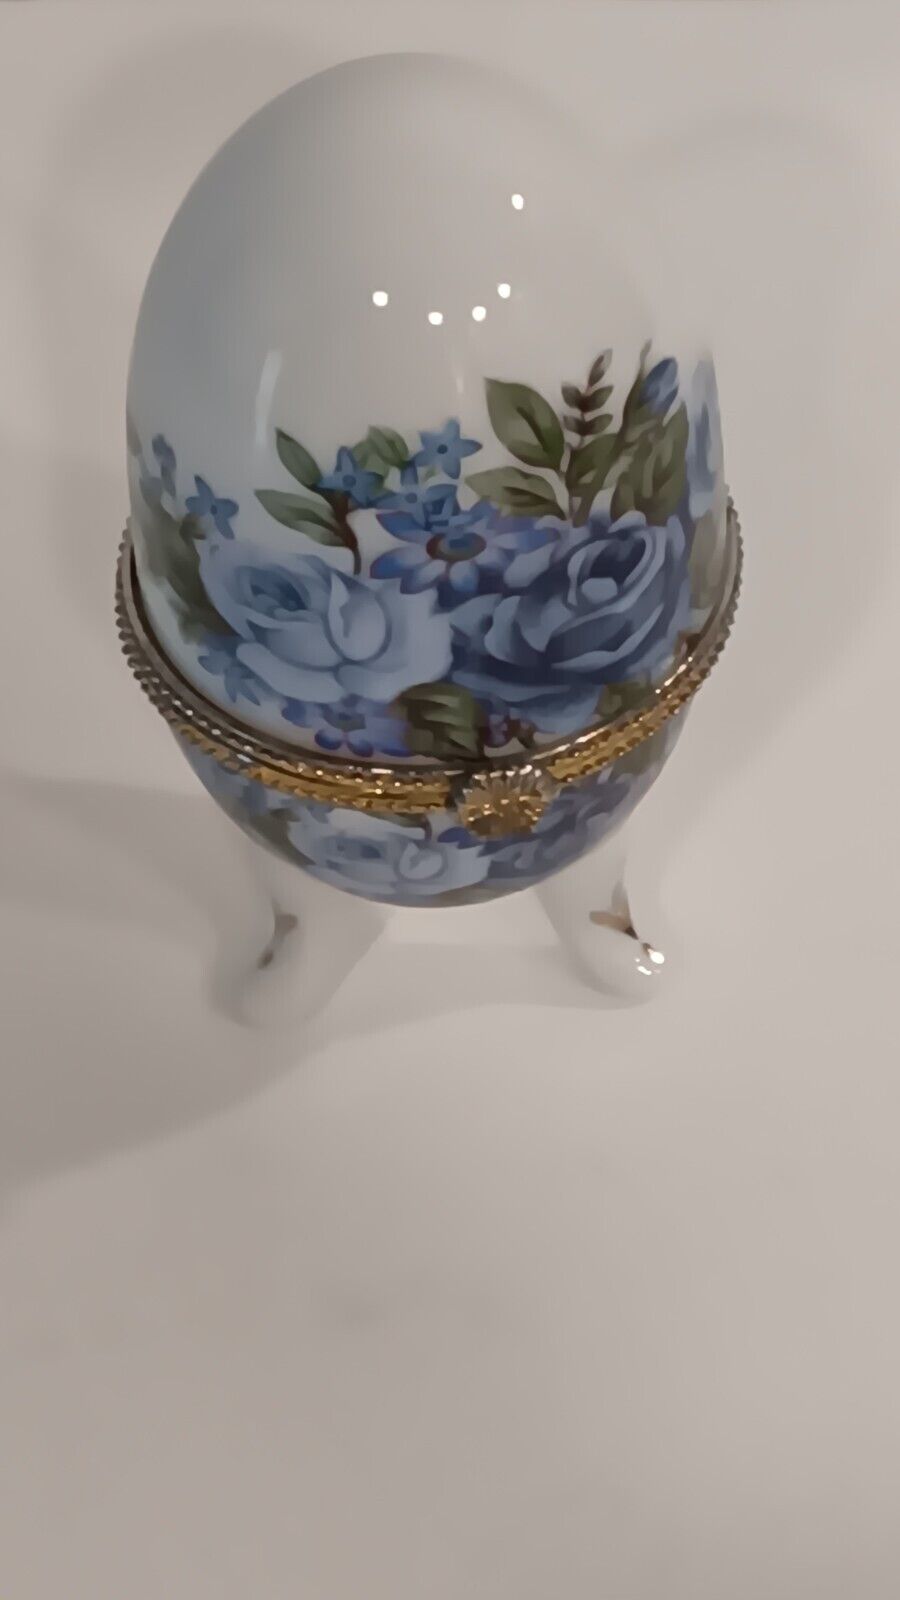 Vintage Egg-Shaped Blue & White with Gold Accents Ceramic Footed Trinket Box